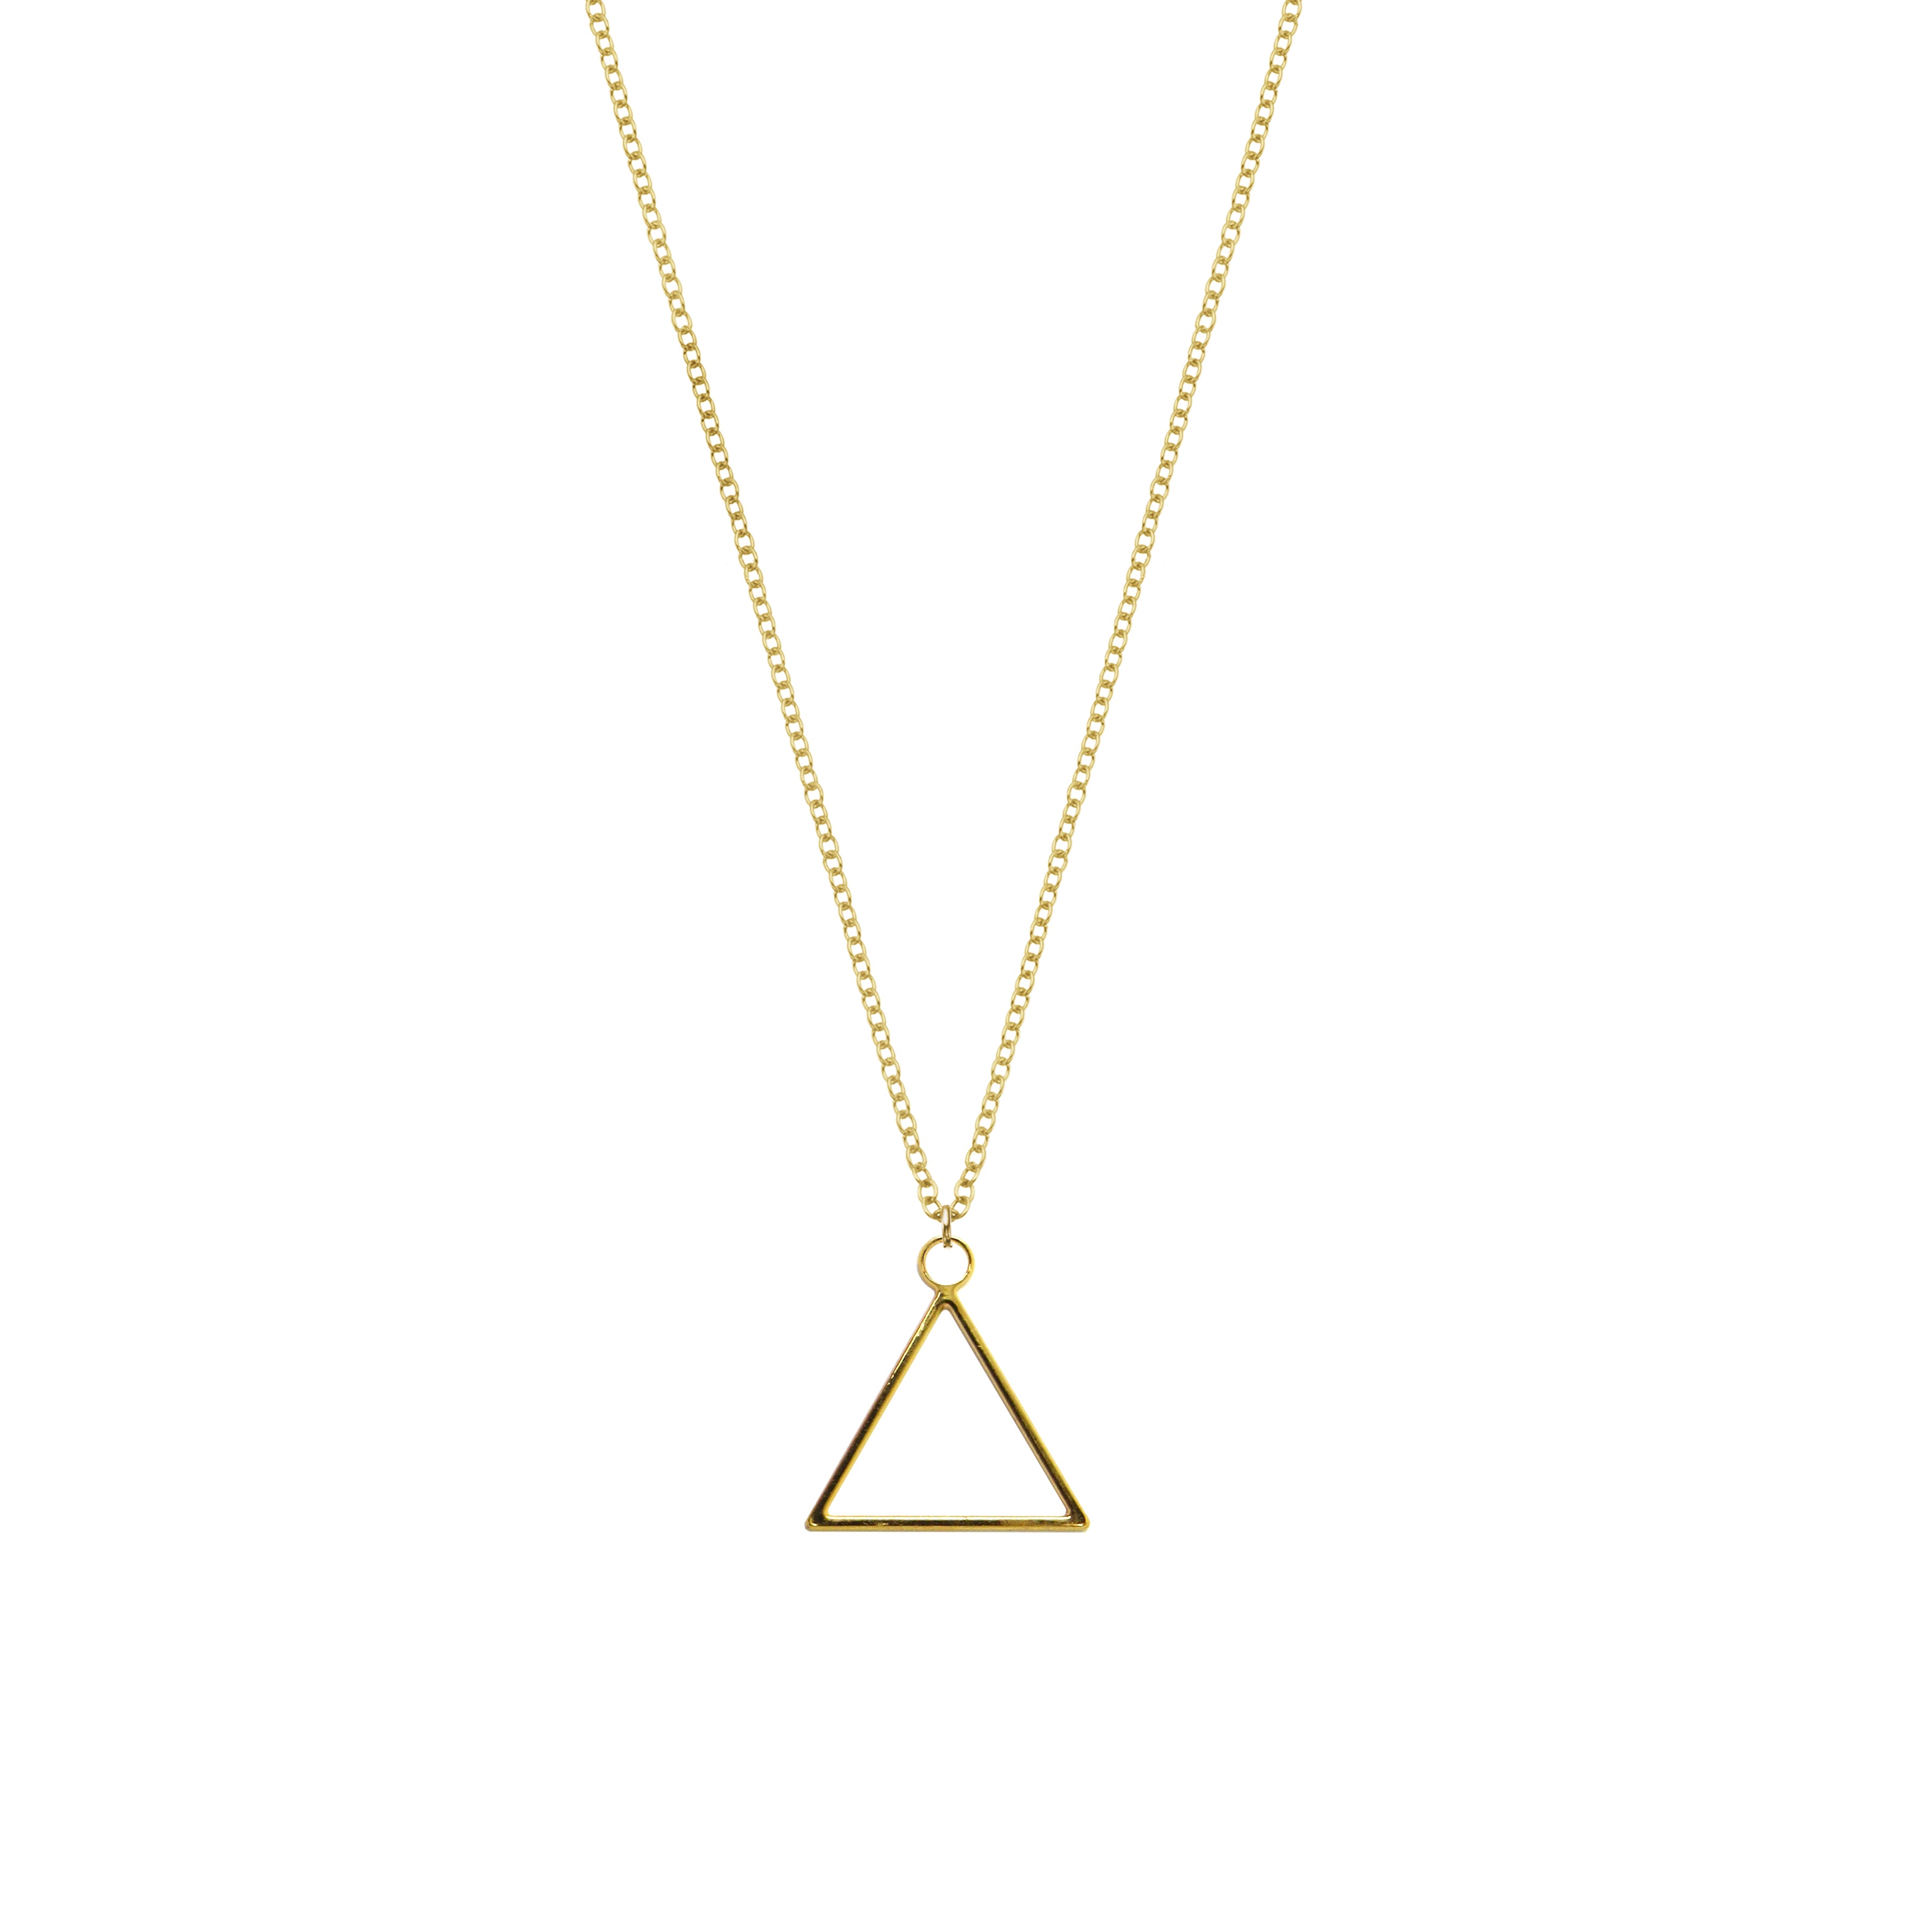 Vnox Men Hollow Double Triangle Necklaces Stainless Steel Pendant With  Chain | eBay